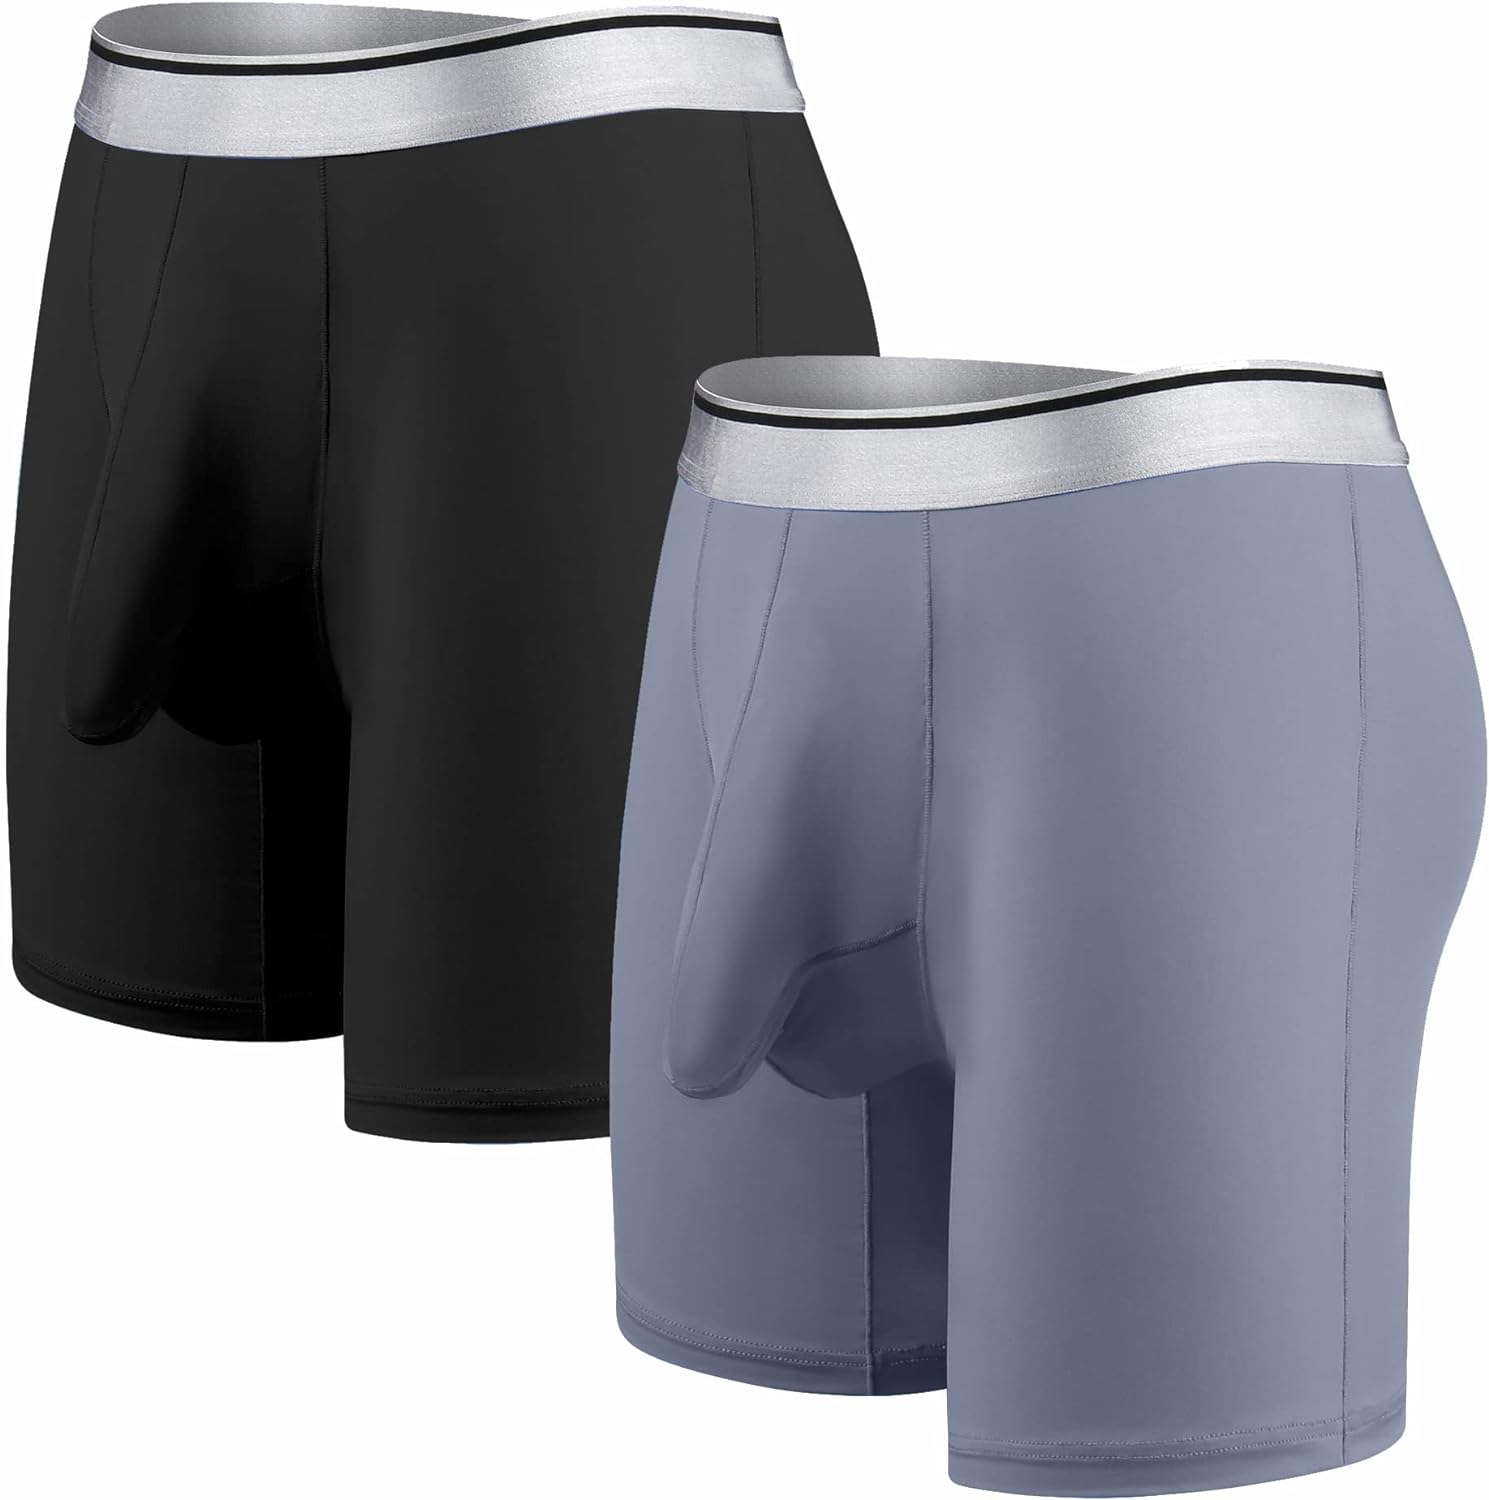 Buy Saxx Kinetic HD Boxer Brief from £21.00 (Today) – Best Deals